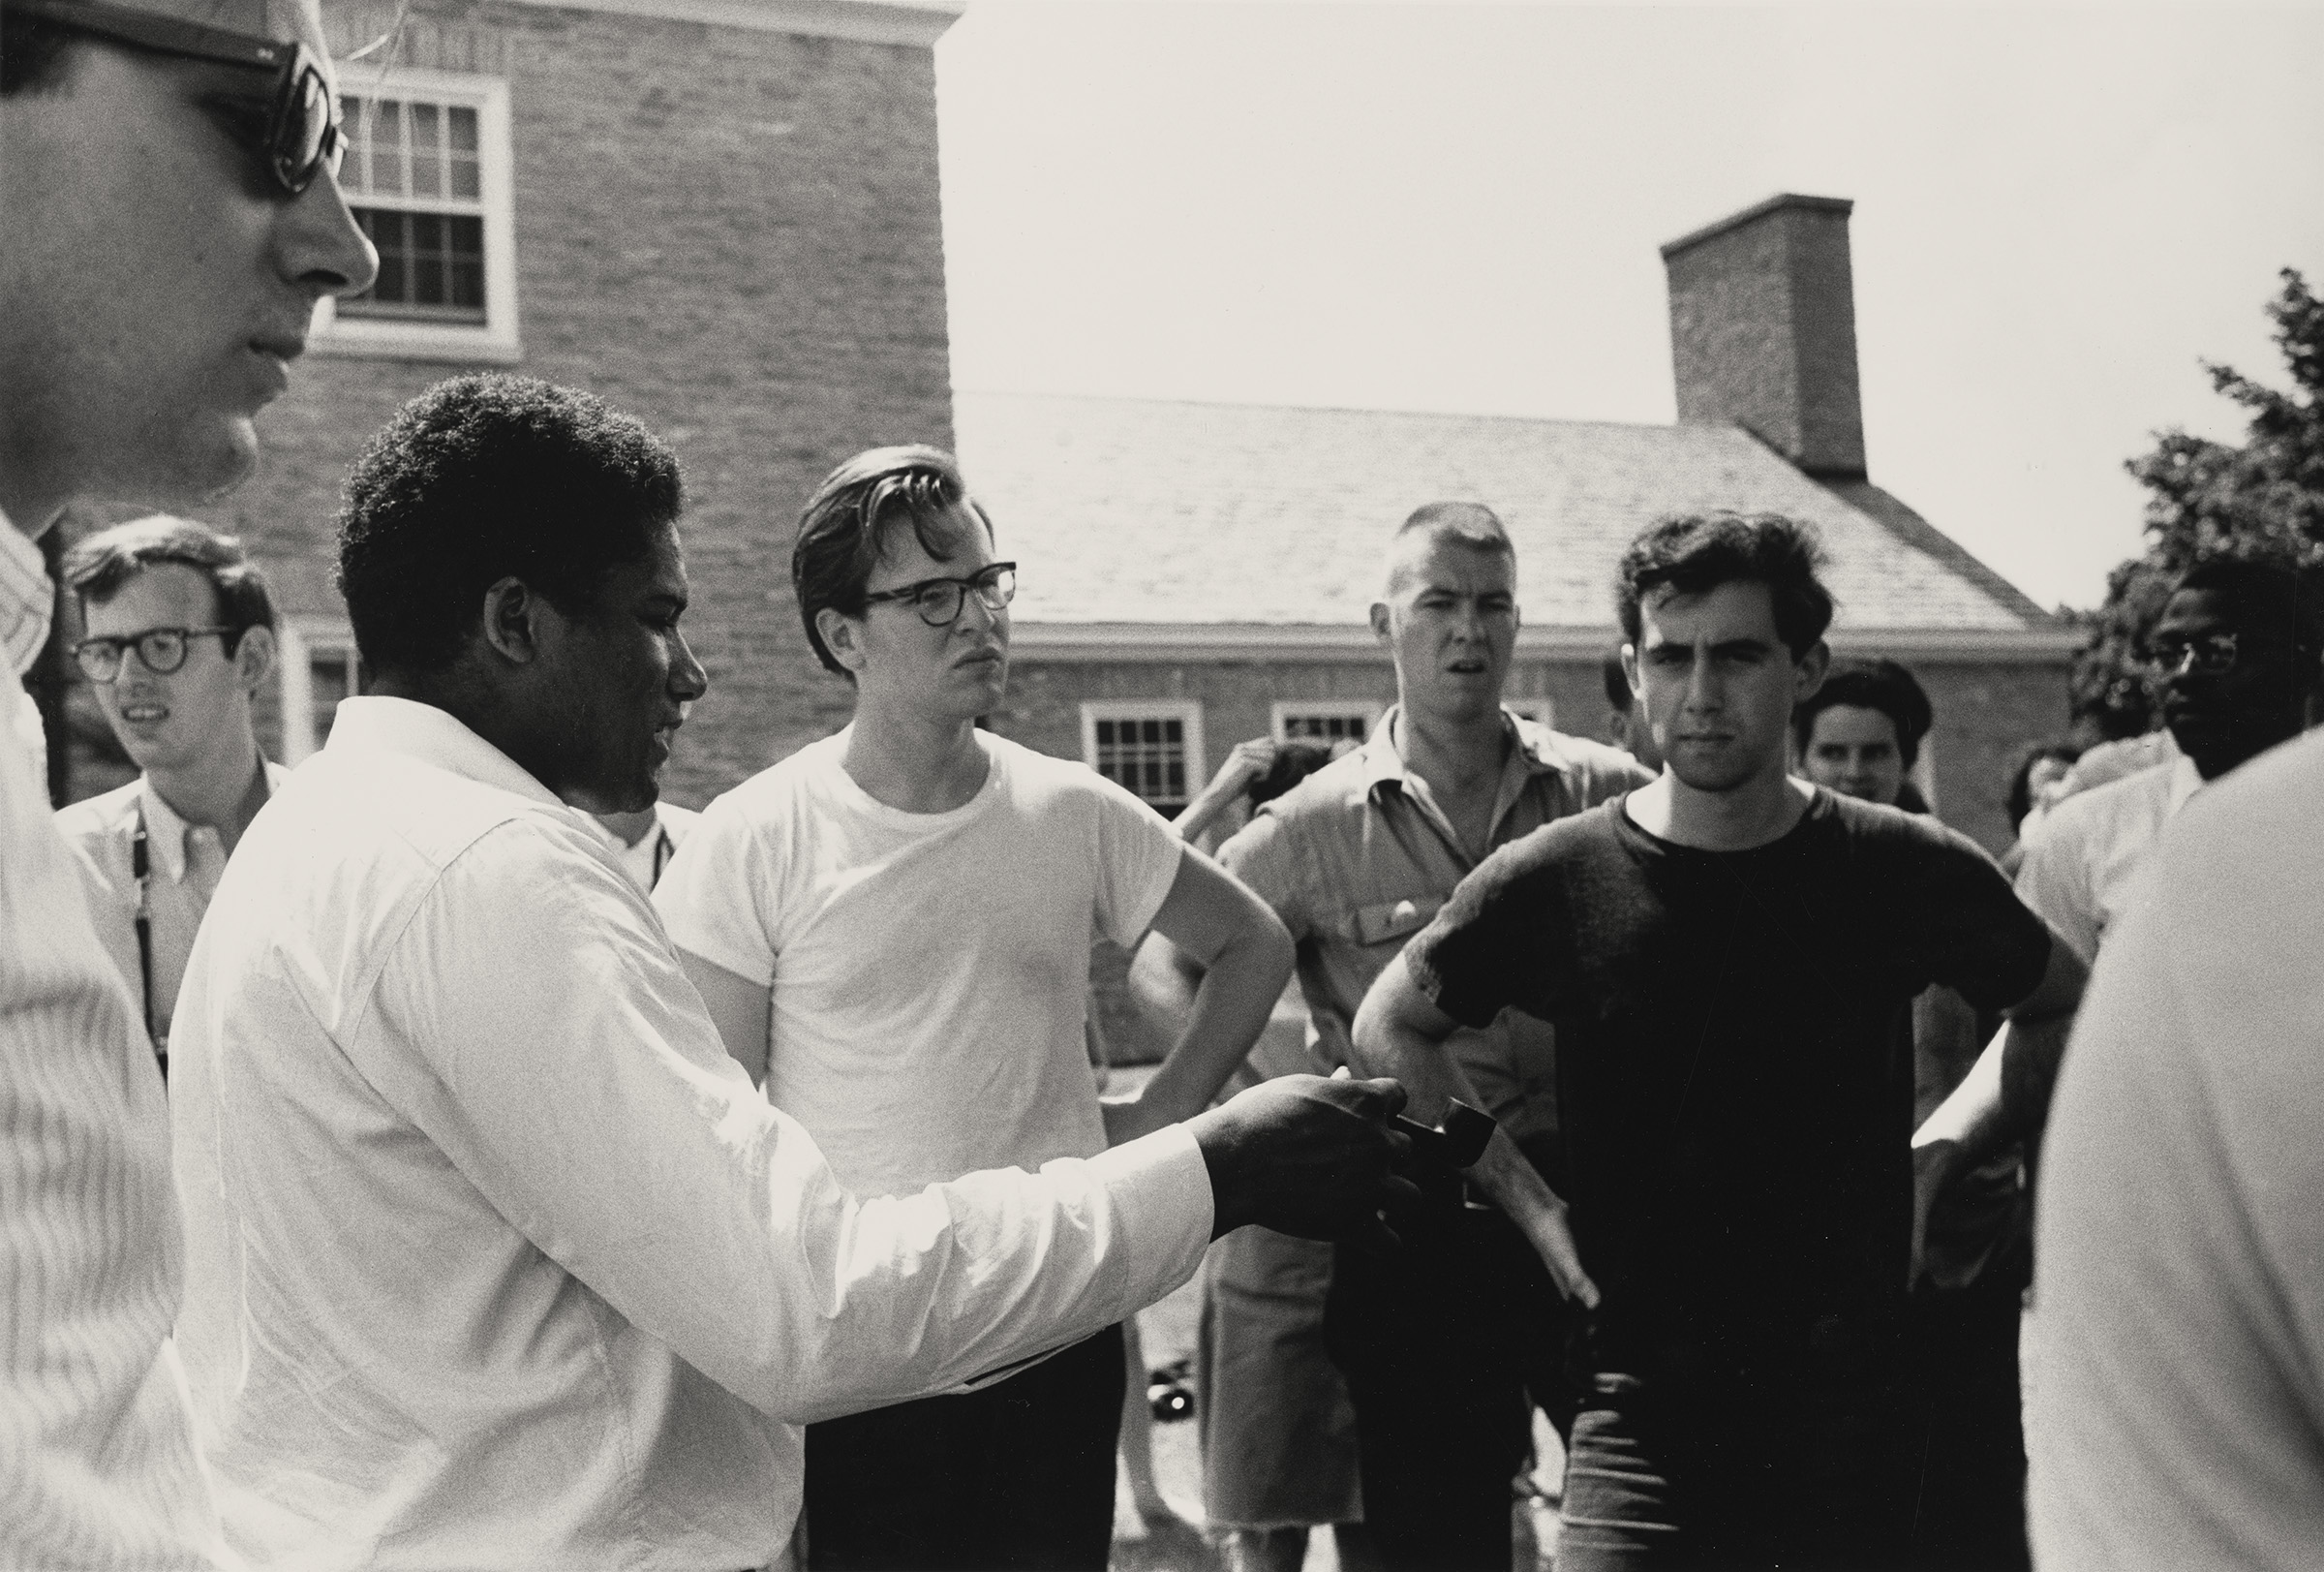 James Foreman and Andrew Goodman, June 1964. Photograph by Steve Schapiro. James Foreman leads a role playing activity to teach Freedom Summer volunteers how to respond nonviolently. Andrew Goodman, who will be killed in Mississippi that summer, is pictured in the black t-shirt. The photograph was taken during the Freedom Summer orientation session in Oxford, Ohio. Photograph in the collection of Miami University Art Museum, Oxford Ohio. Partial gift of the artist and partial purchase with contributions from the Kezur Endowment Fund (2019.23.16).